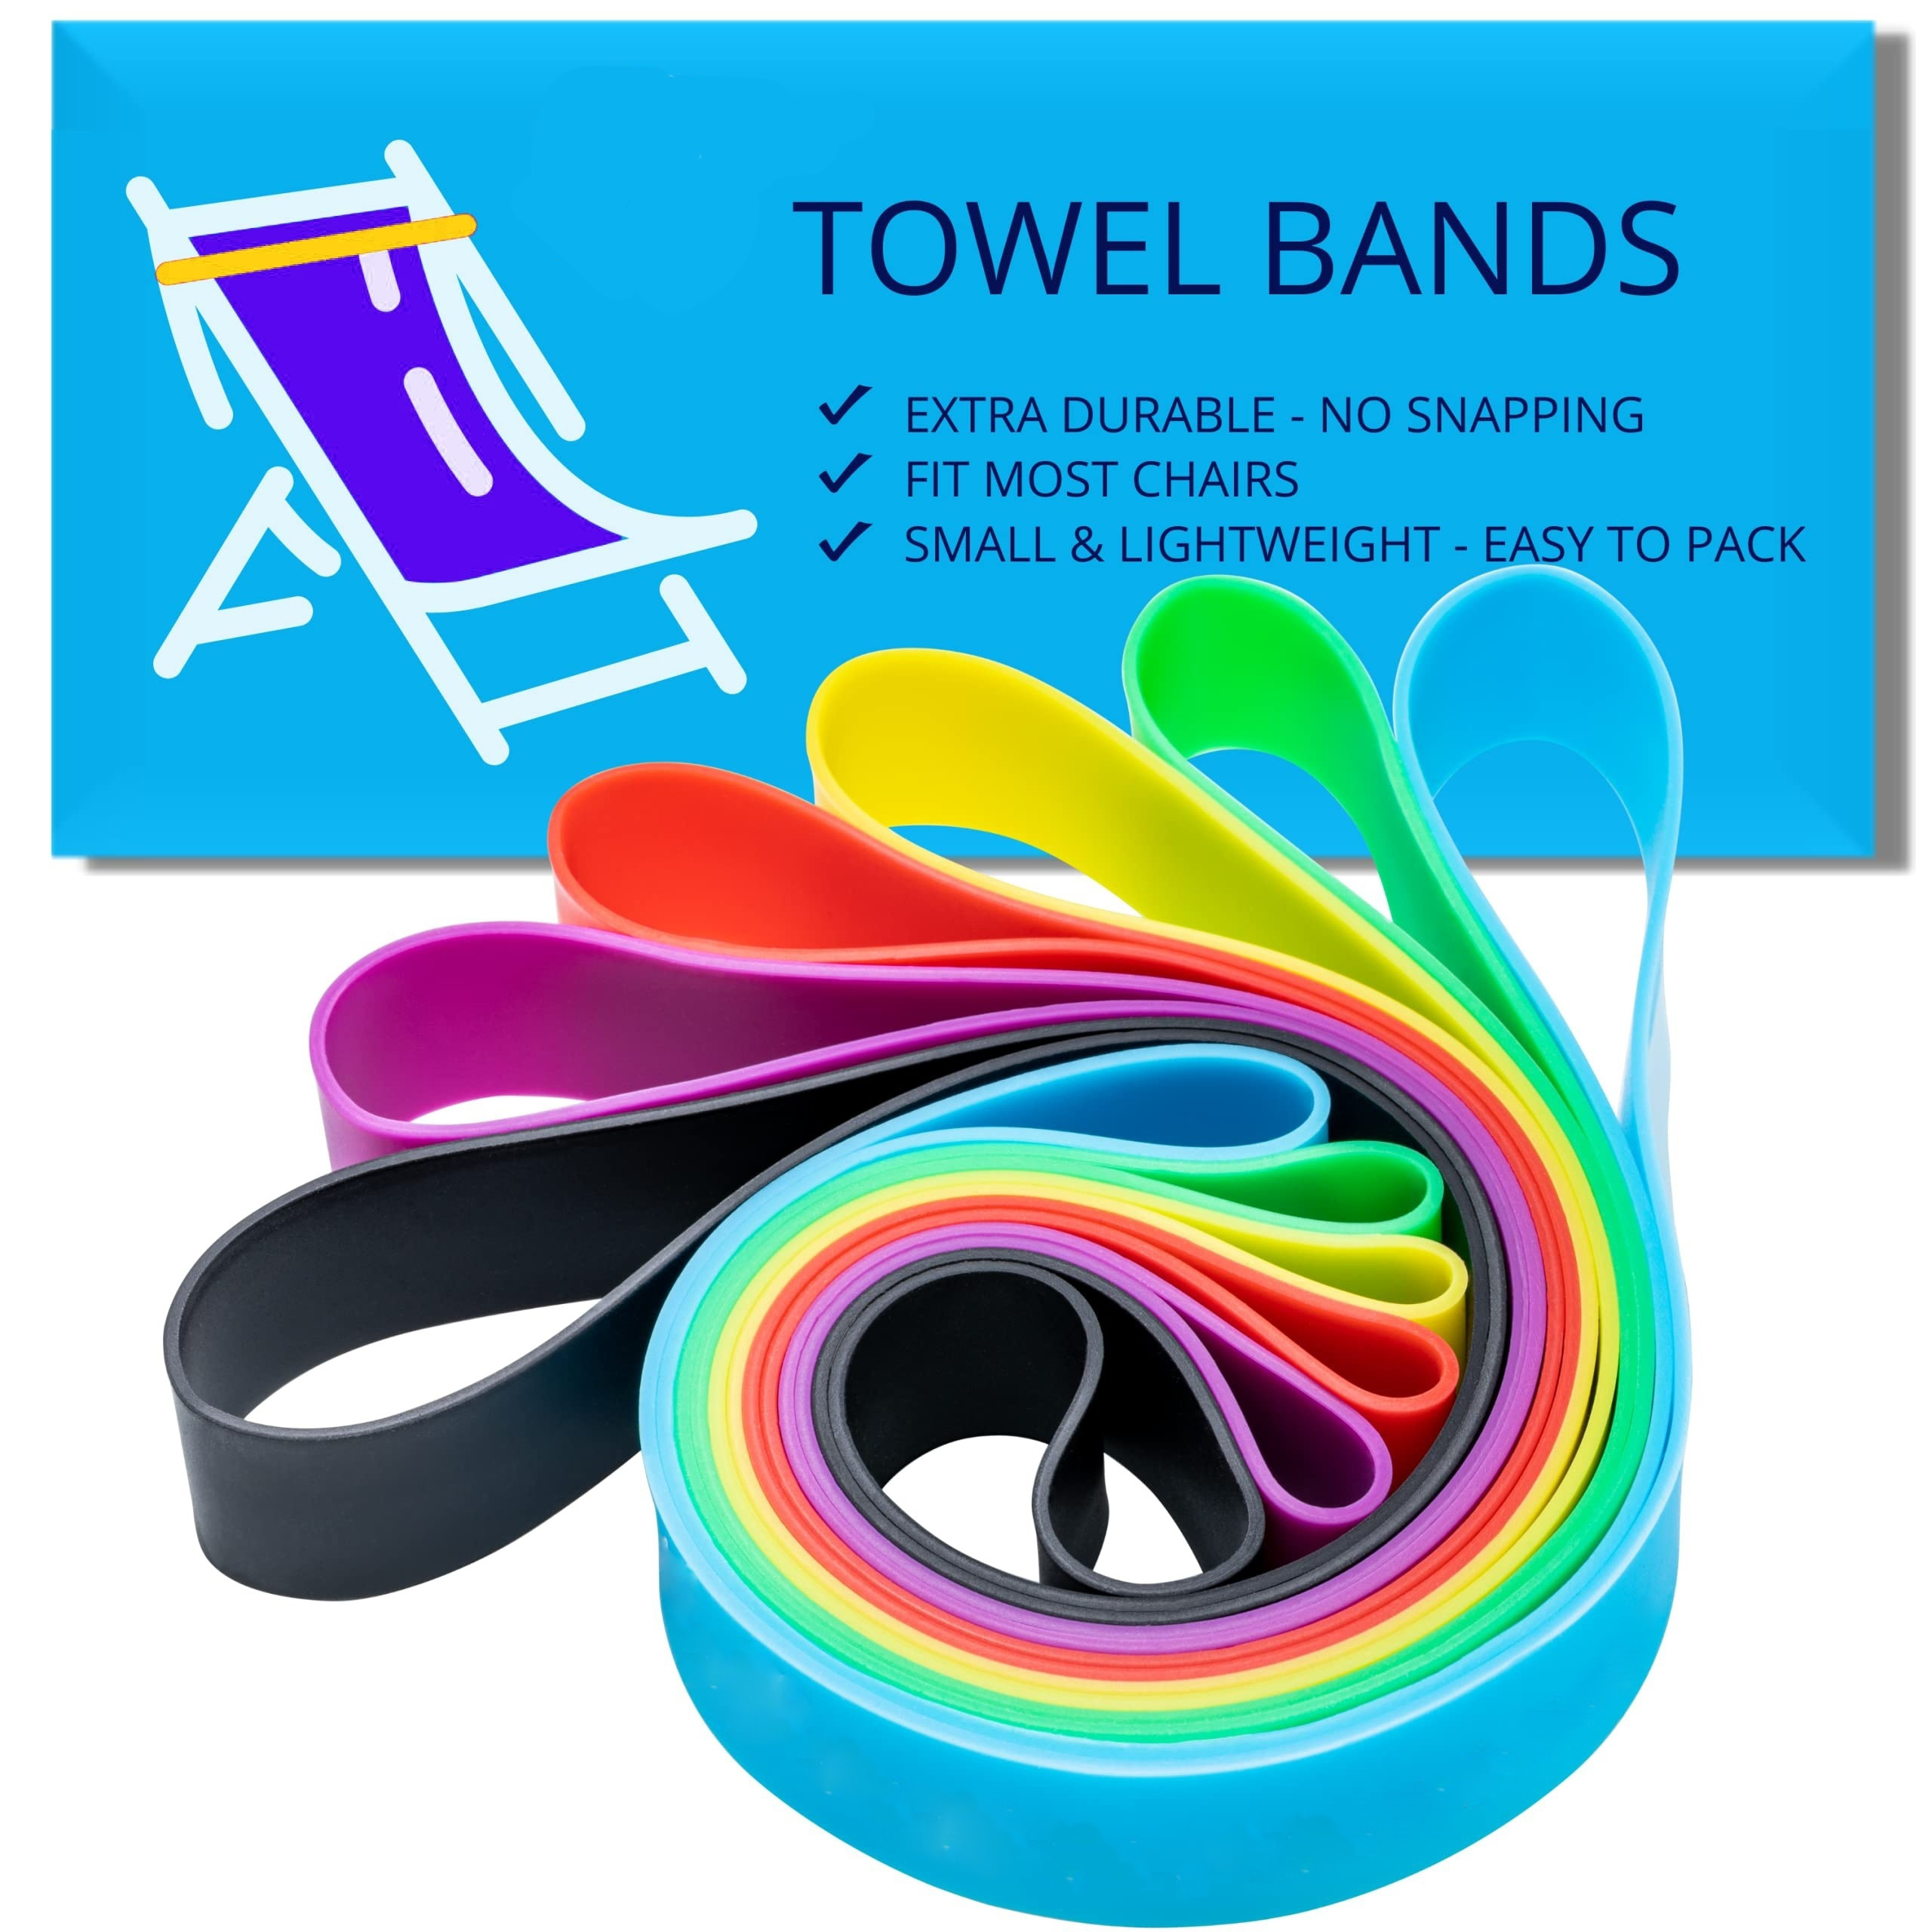 

2/4pcs Stretchy Silicone Towel Fixing Strap For Beach Chairs, Pool Chairs, Cruise Chairs, And More - Securely Hold Your Towel In Place, Assorted Colors